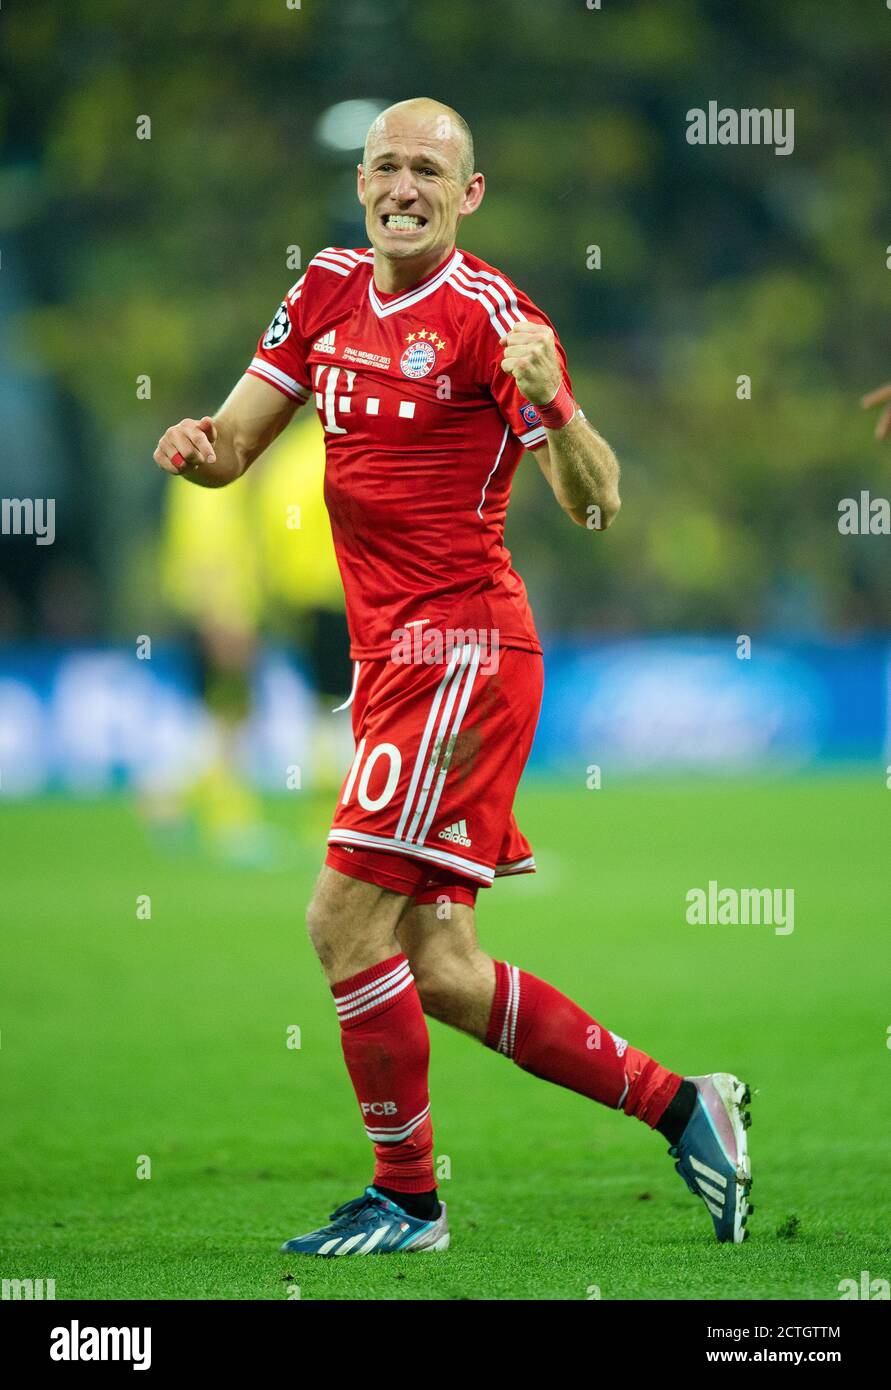 ARJEN ROBBEN CELEBRATES AT THE FINAL WHISTLE AFTER SCORING THE GOAL THAT WON THE CHAMPIONS LEAGUE FOR BAYERN. PICTURE CREDIT : © MARK PAIN / ALAMY Stock Photo